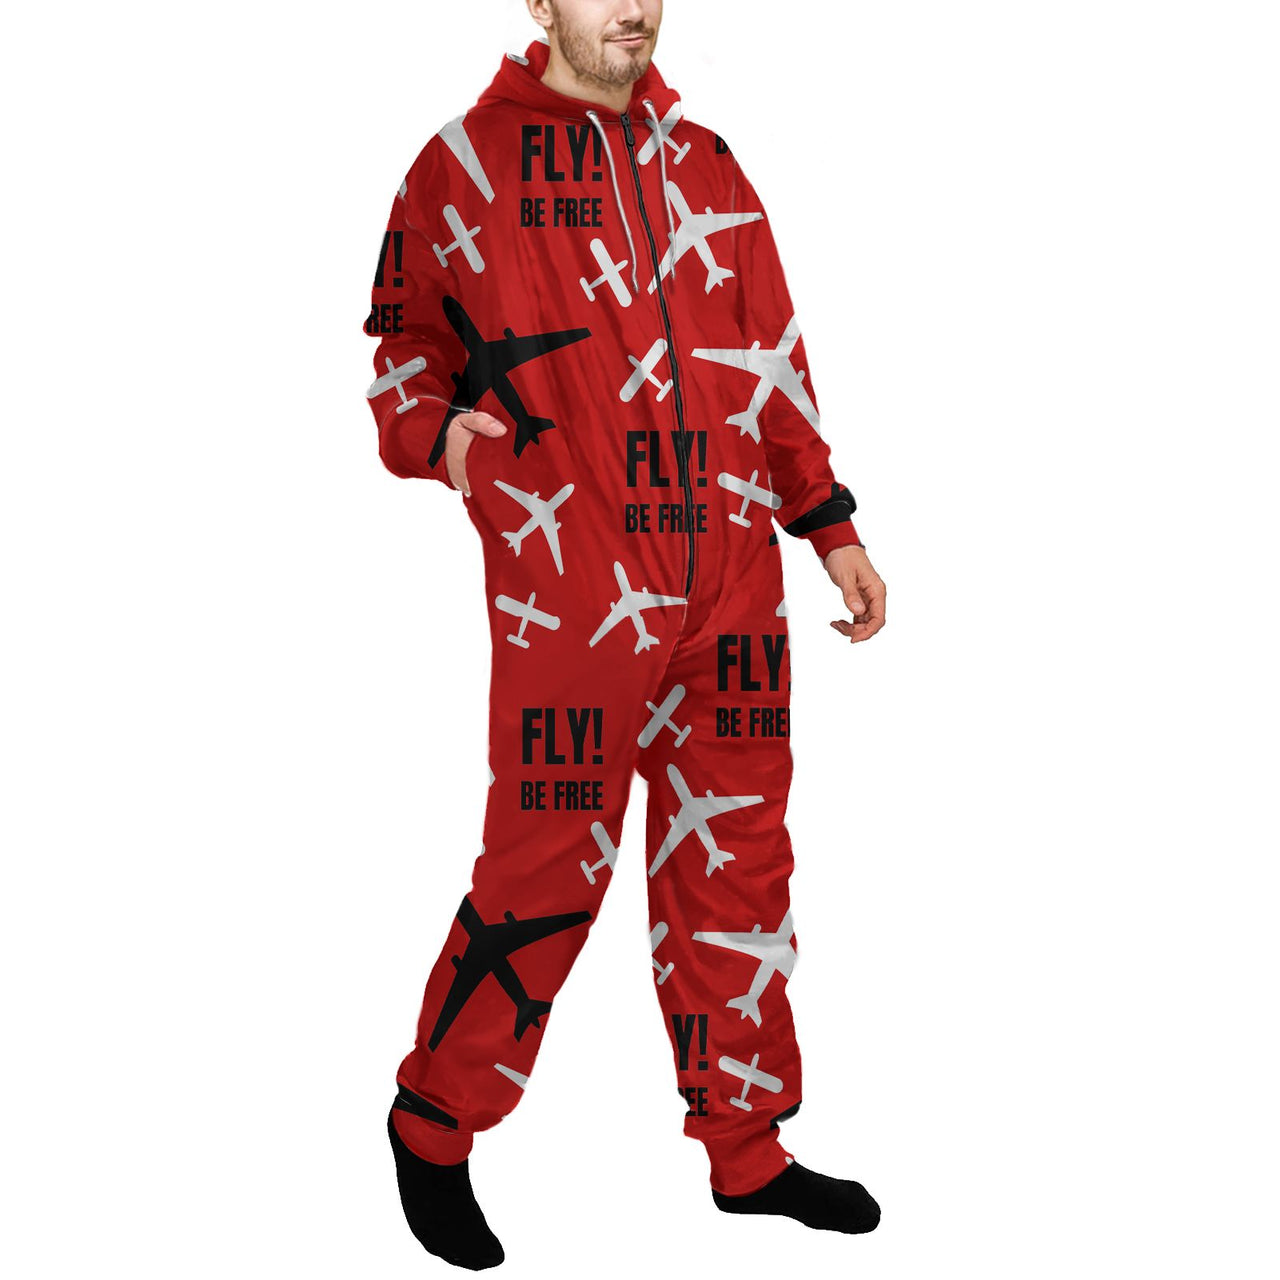 Fly Be Free Red Designed Jumpsuit for Men & Women